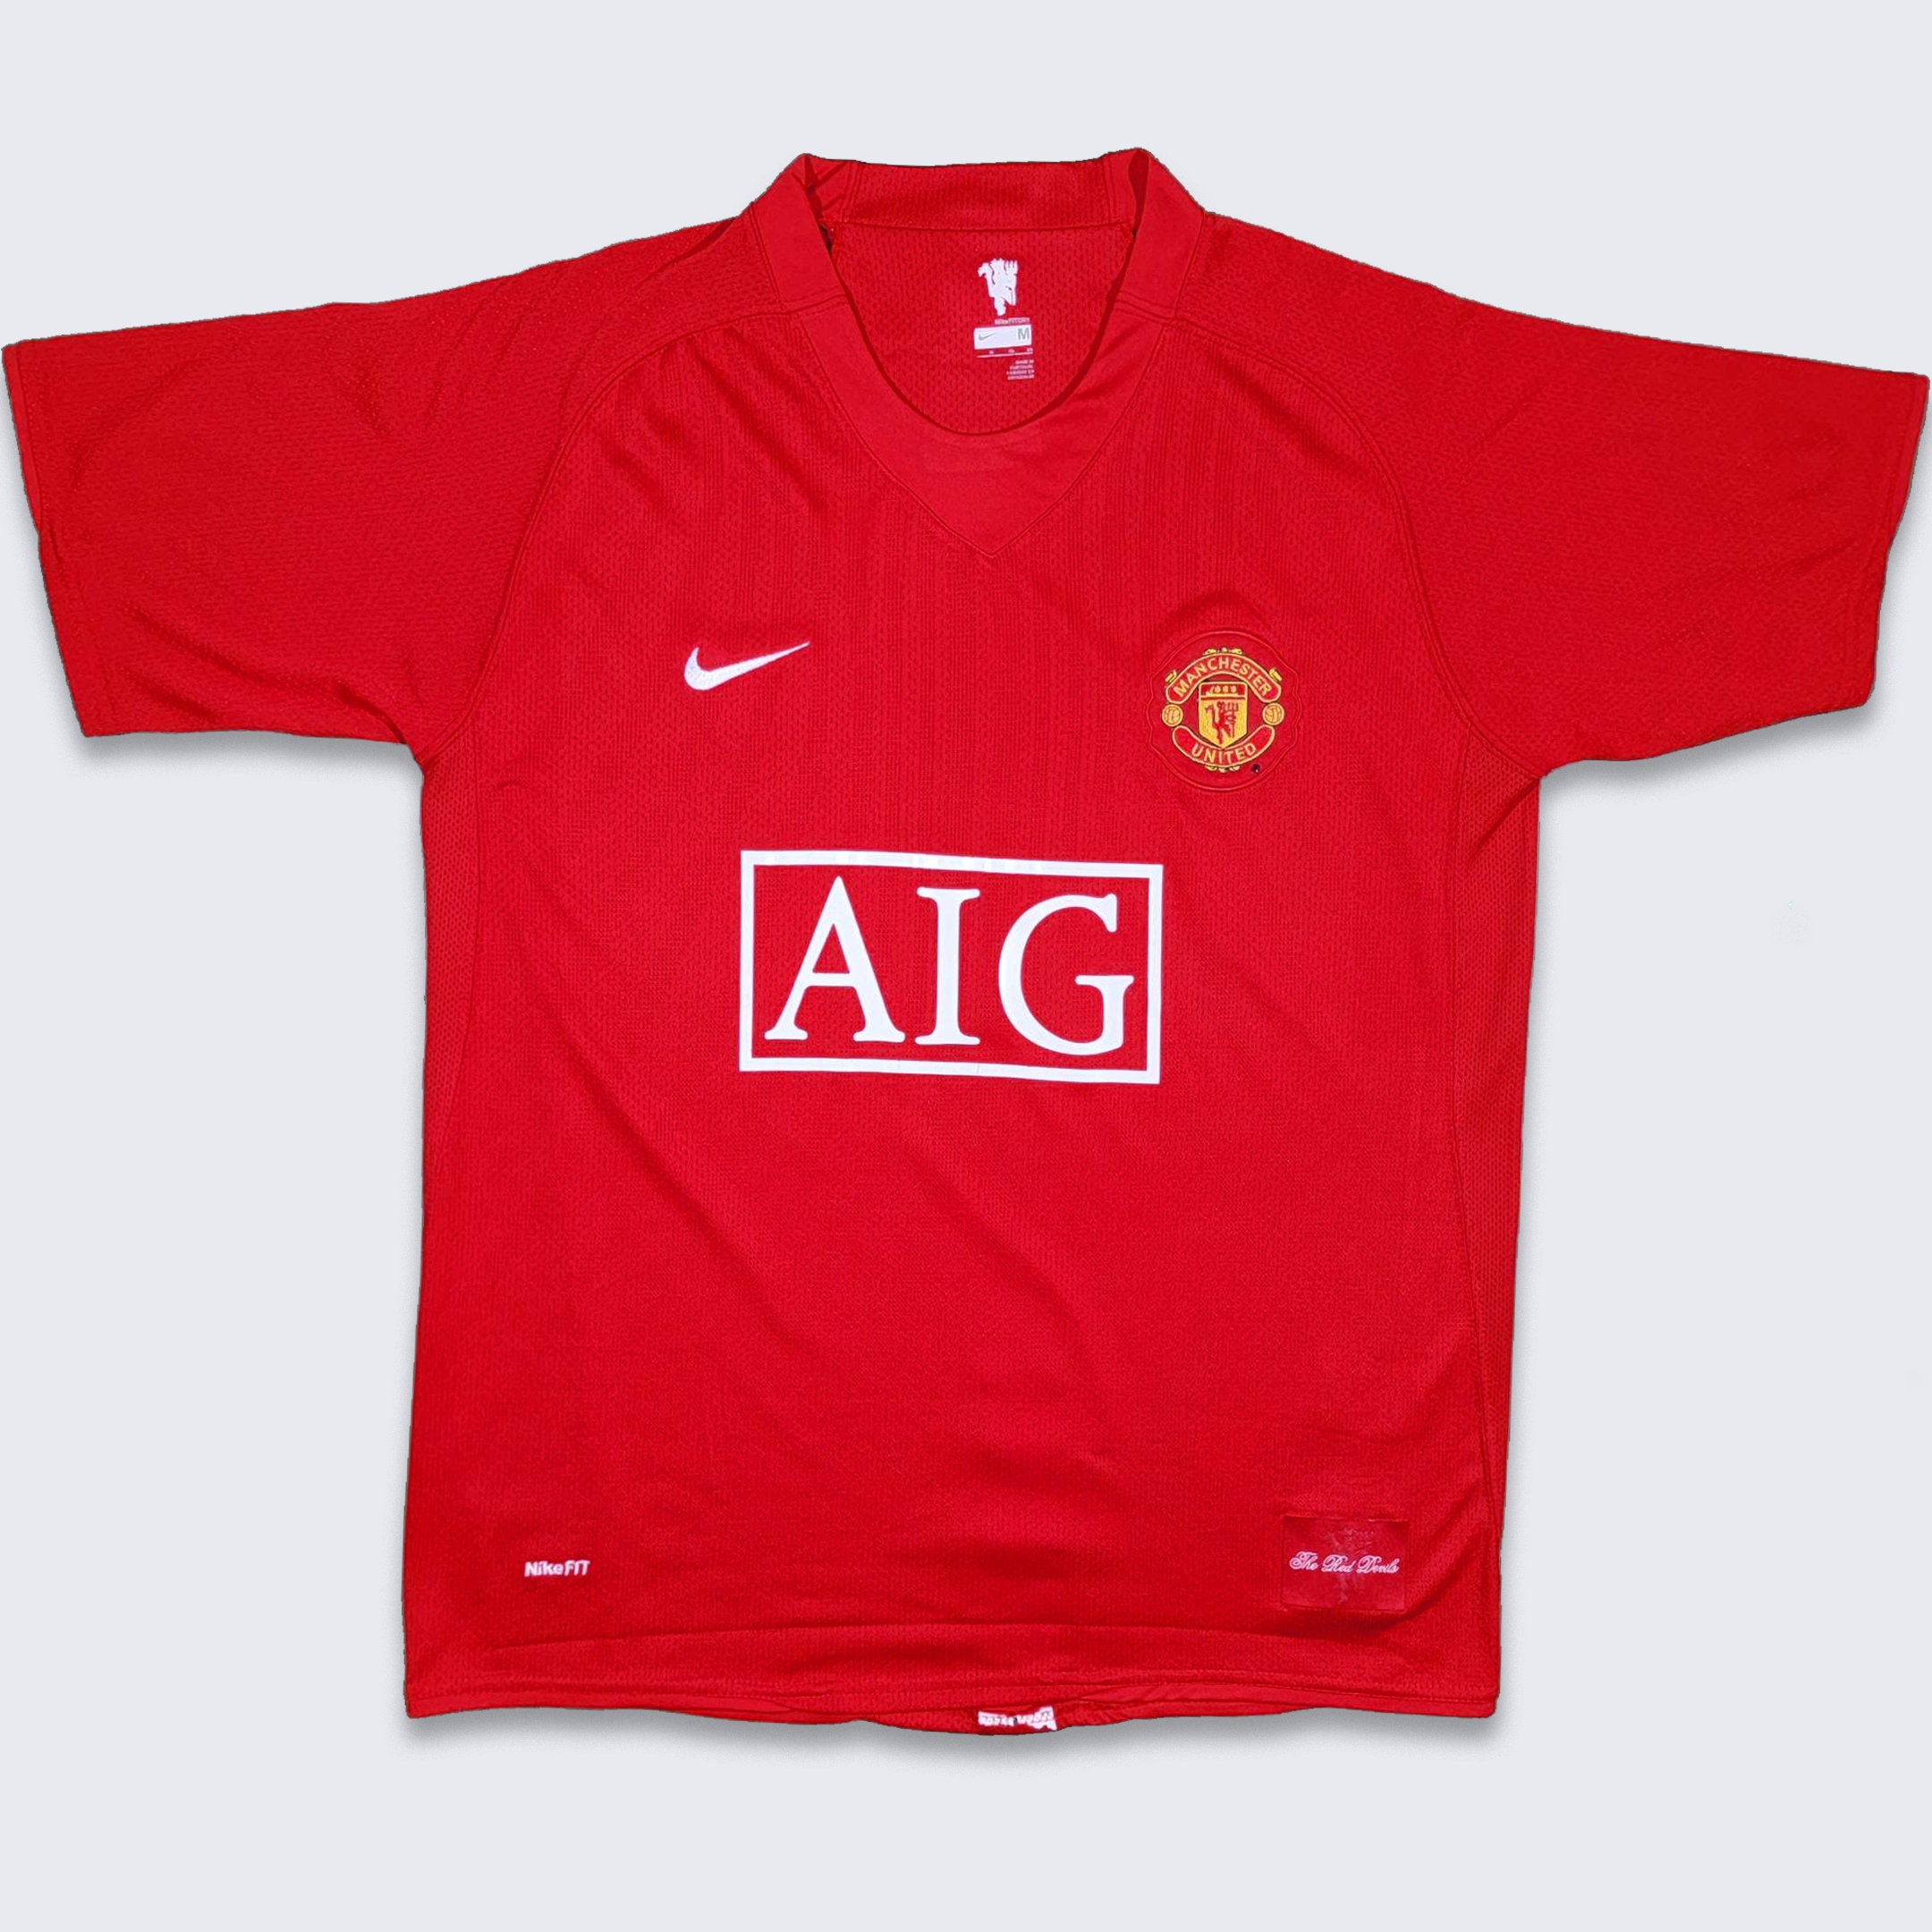 Manchester United Red Devils Soccer Jersey 2007 09 - Etsy Finland